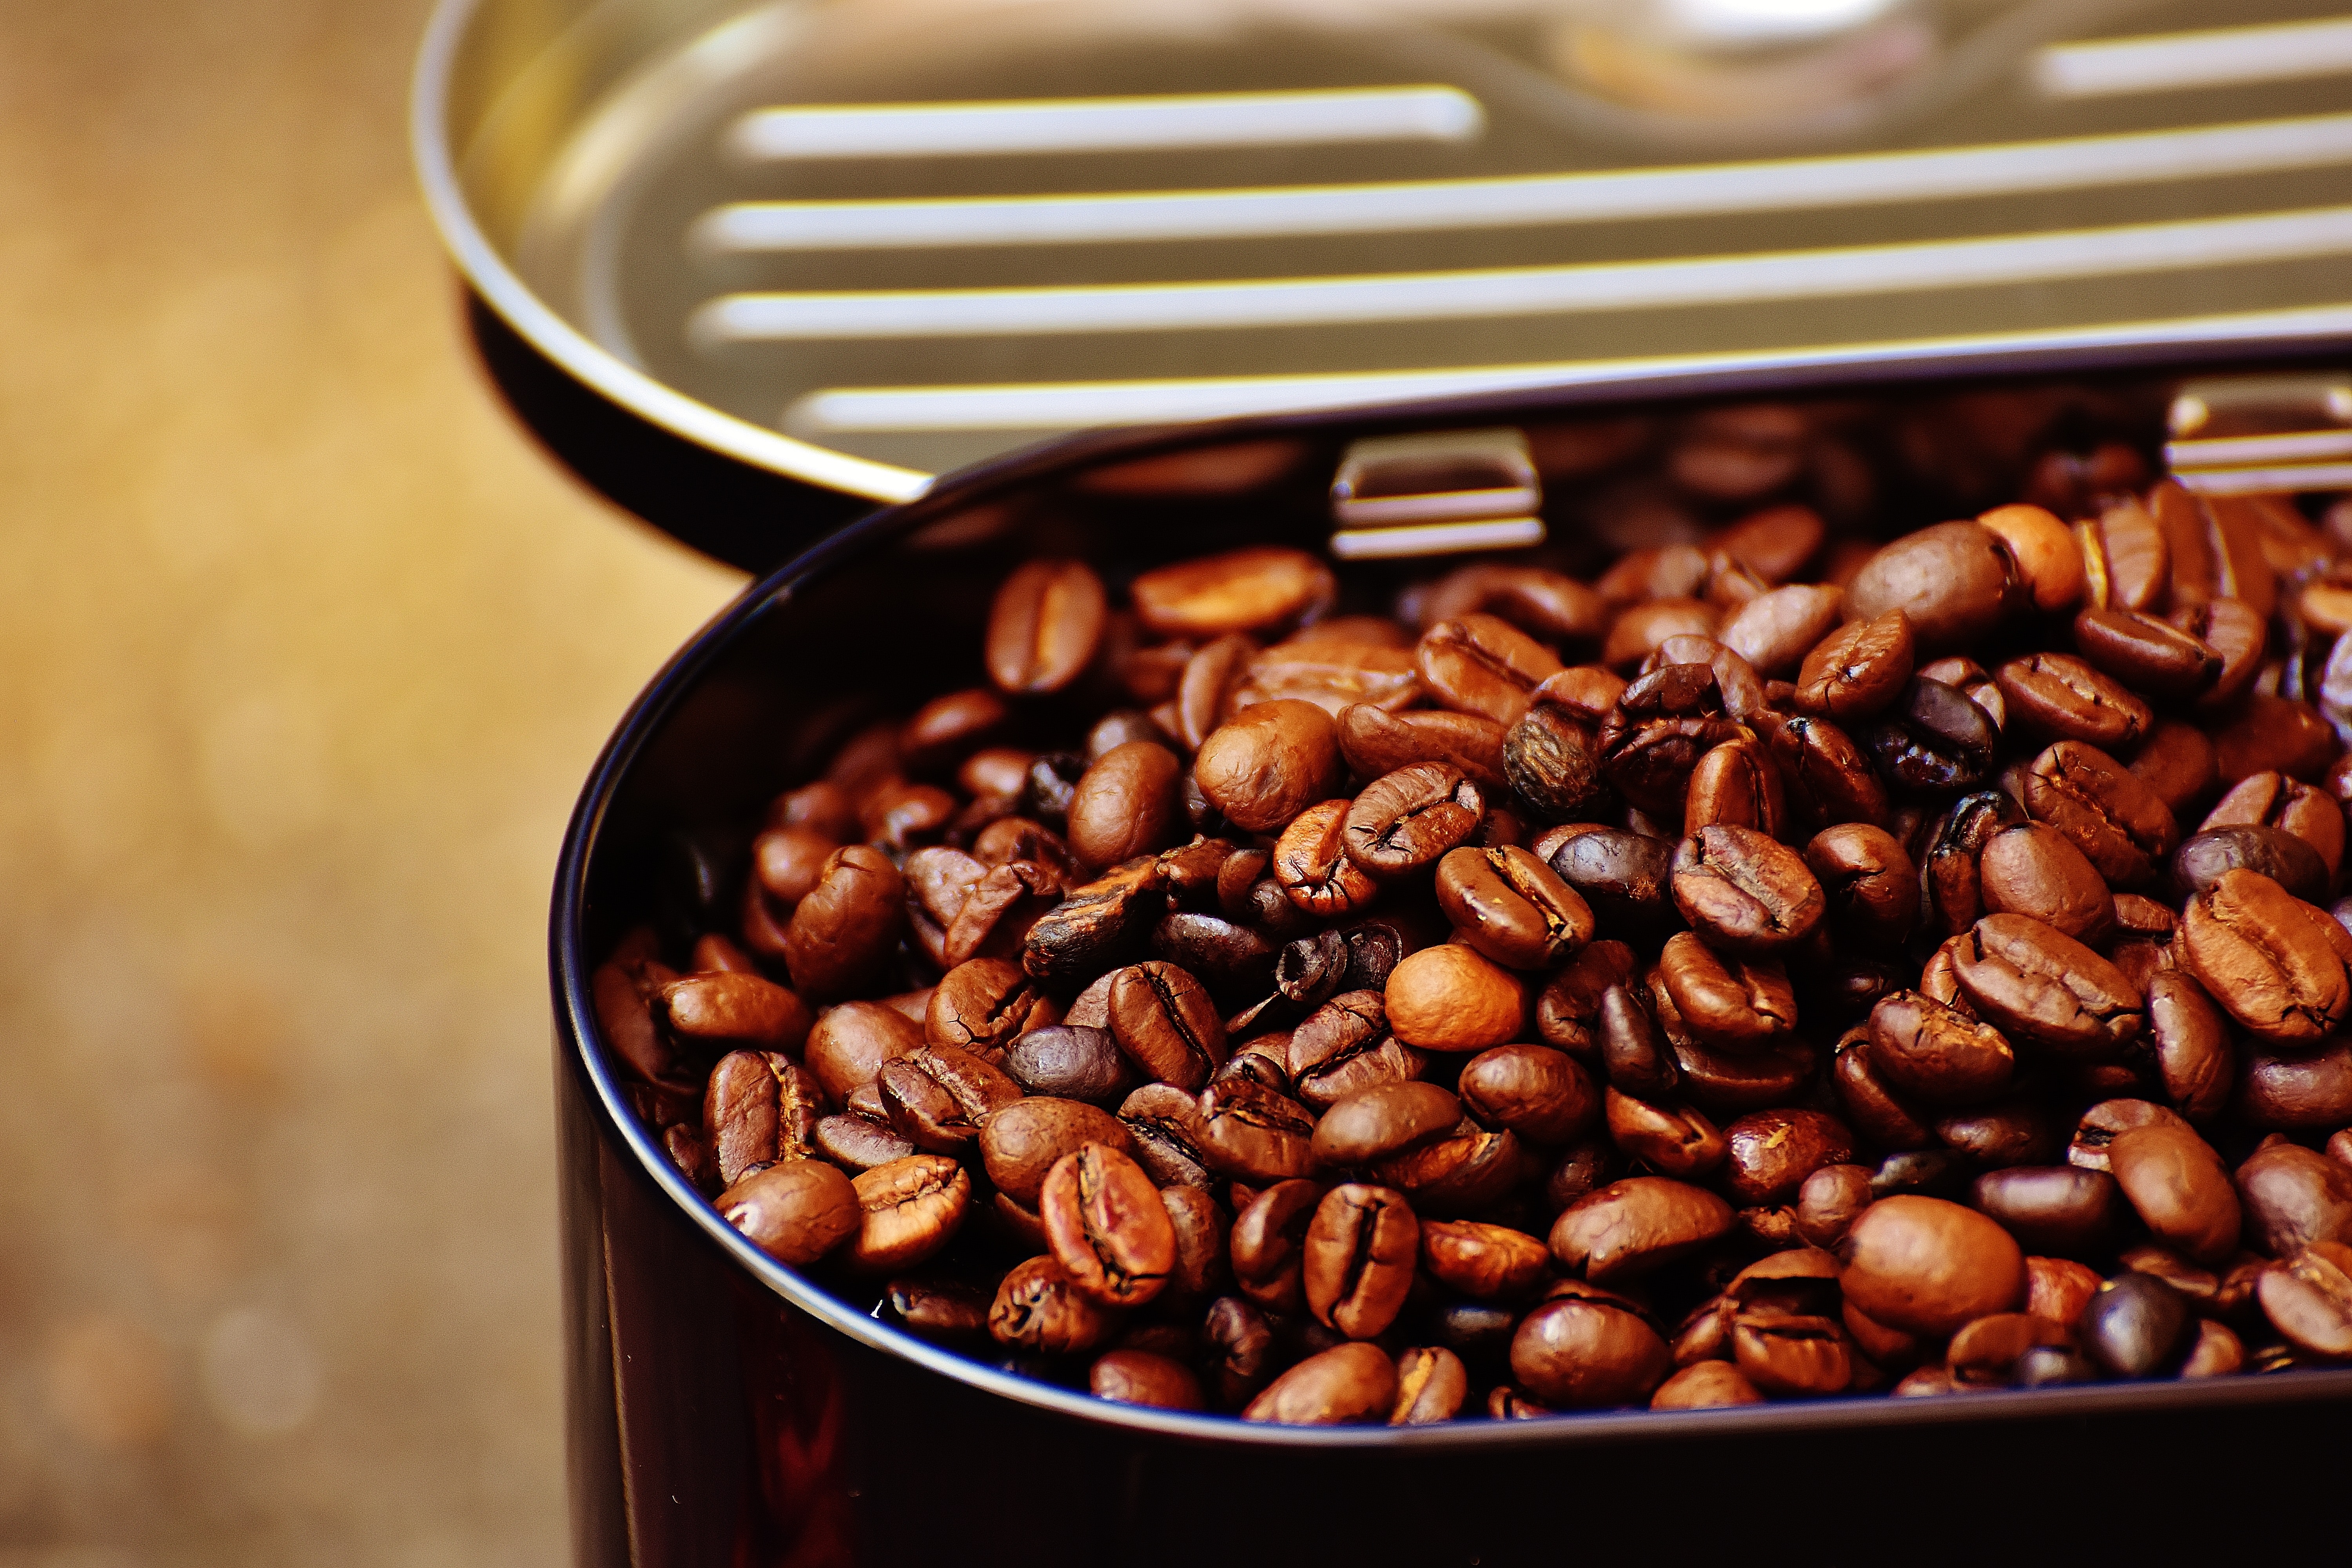 Roasted coffee beans photo